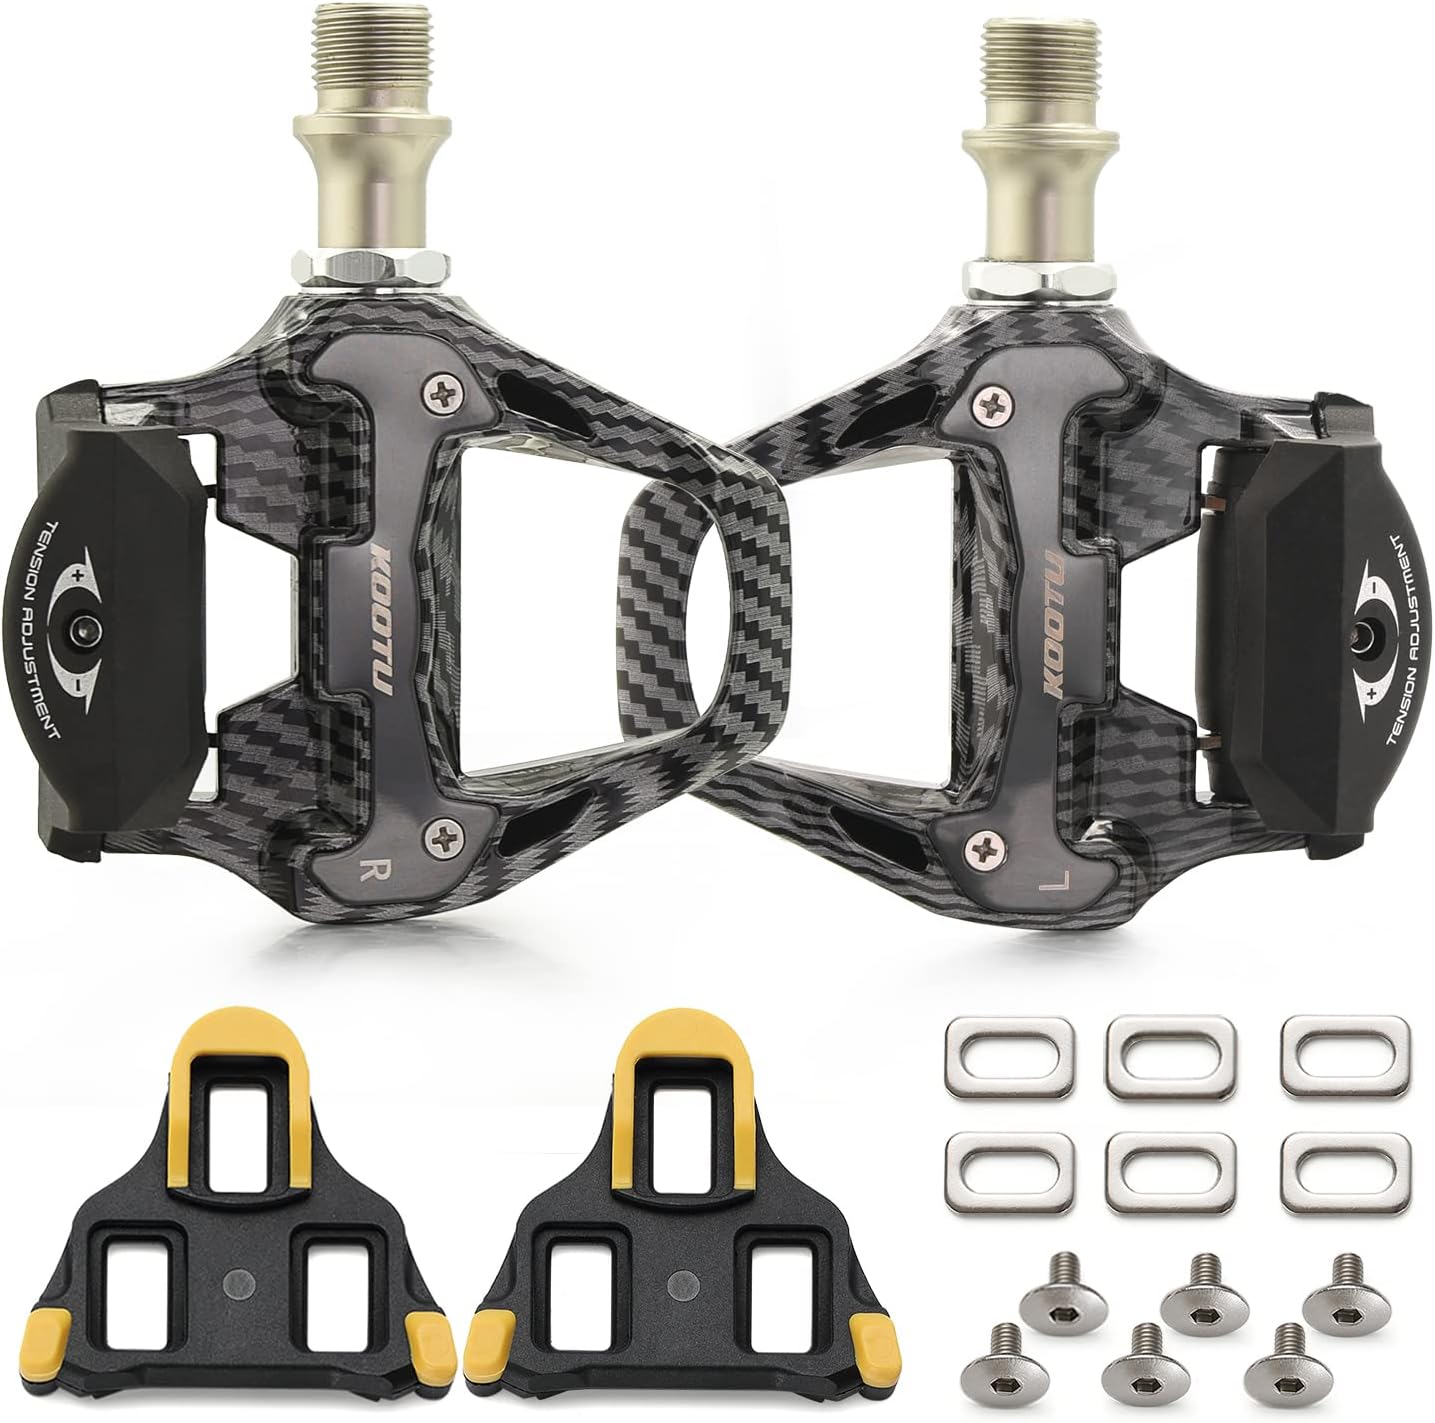 KOOTU Road Bike Pedals Carbon Pattern Clip Pedals For KEO Look Pedals SPD System